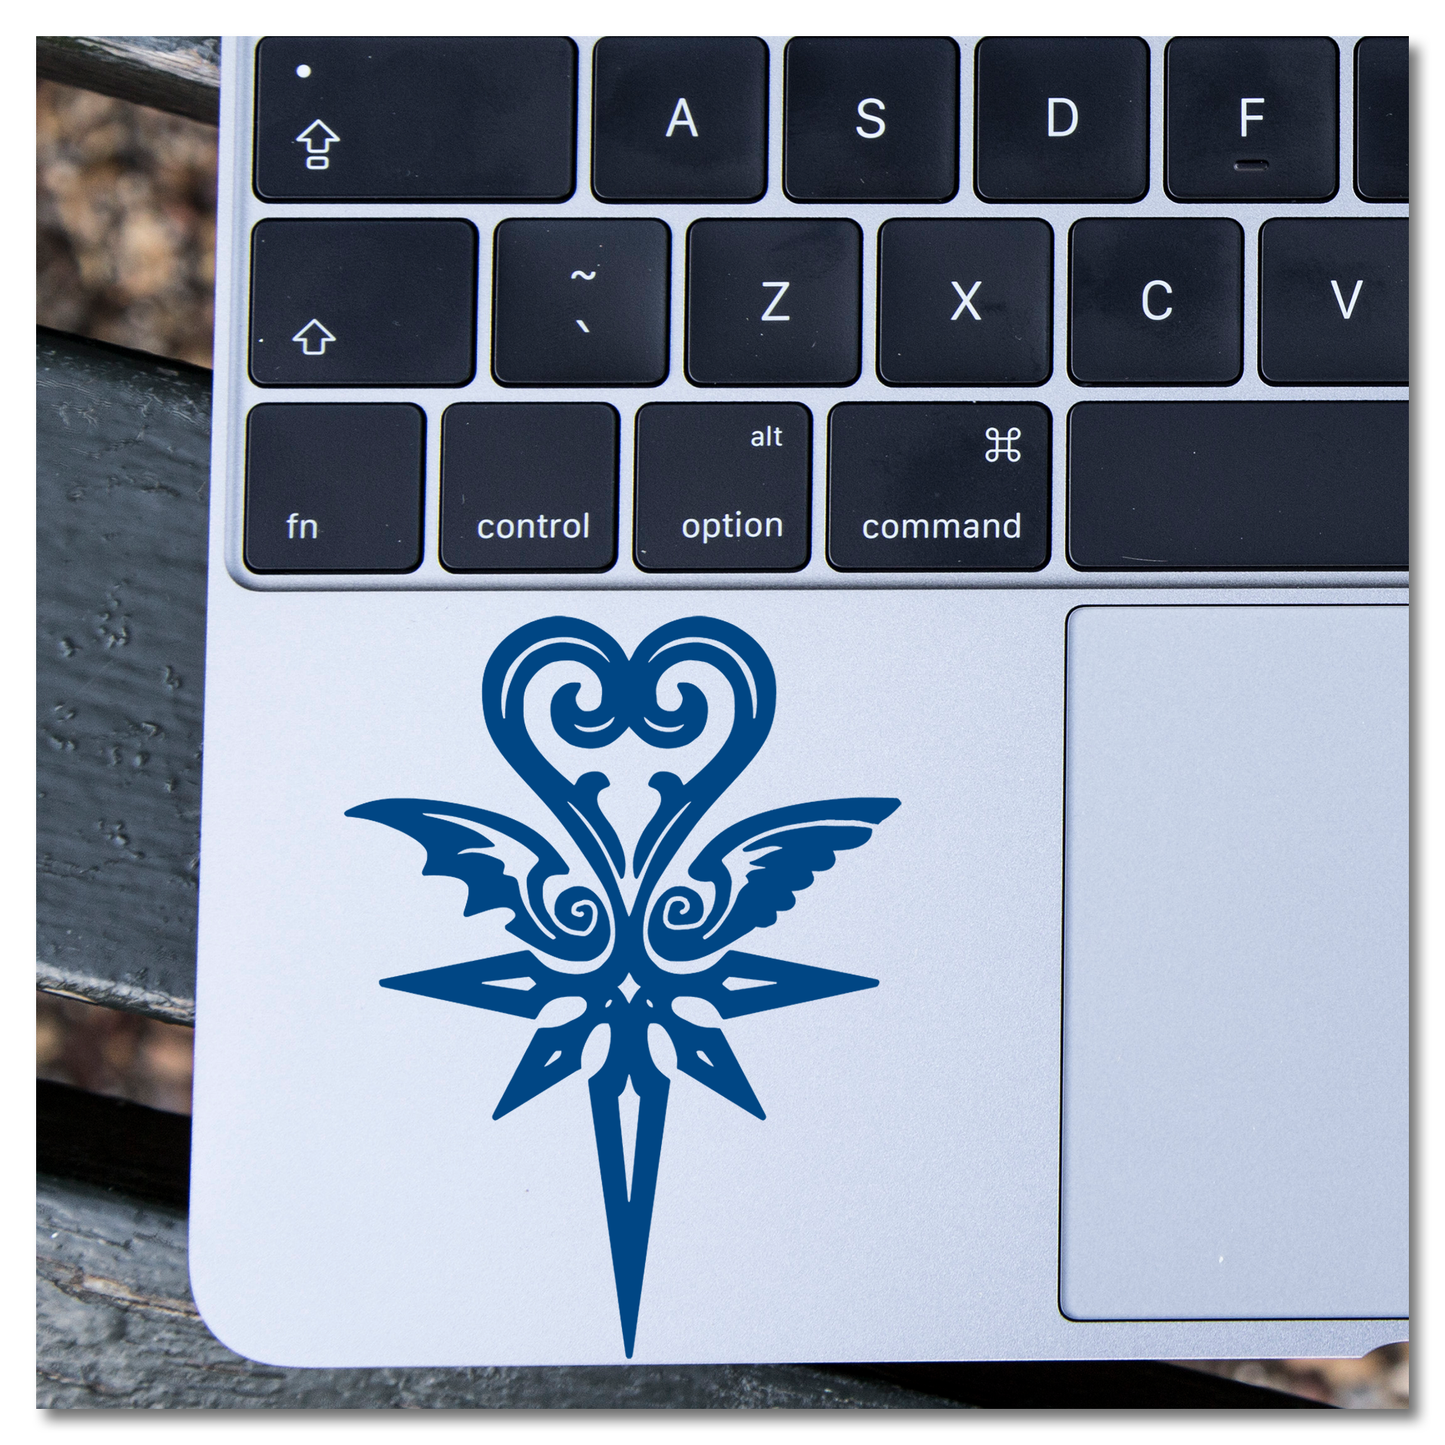 Kingdom Hearts Book Of Prophecy Vinyl Decal Sticker